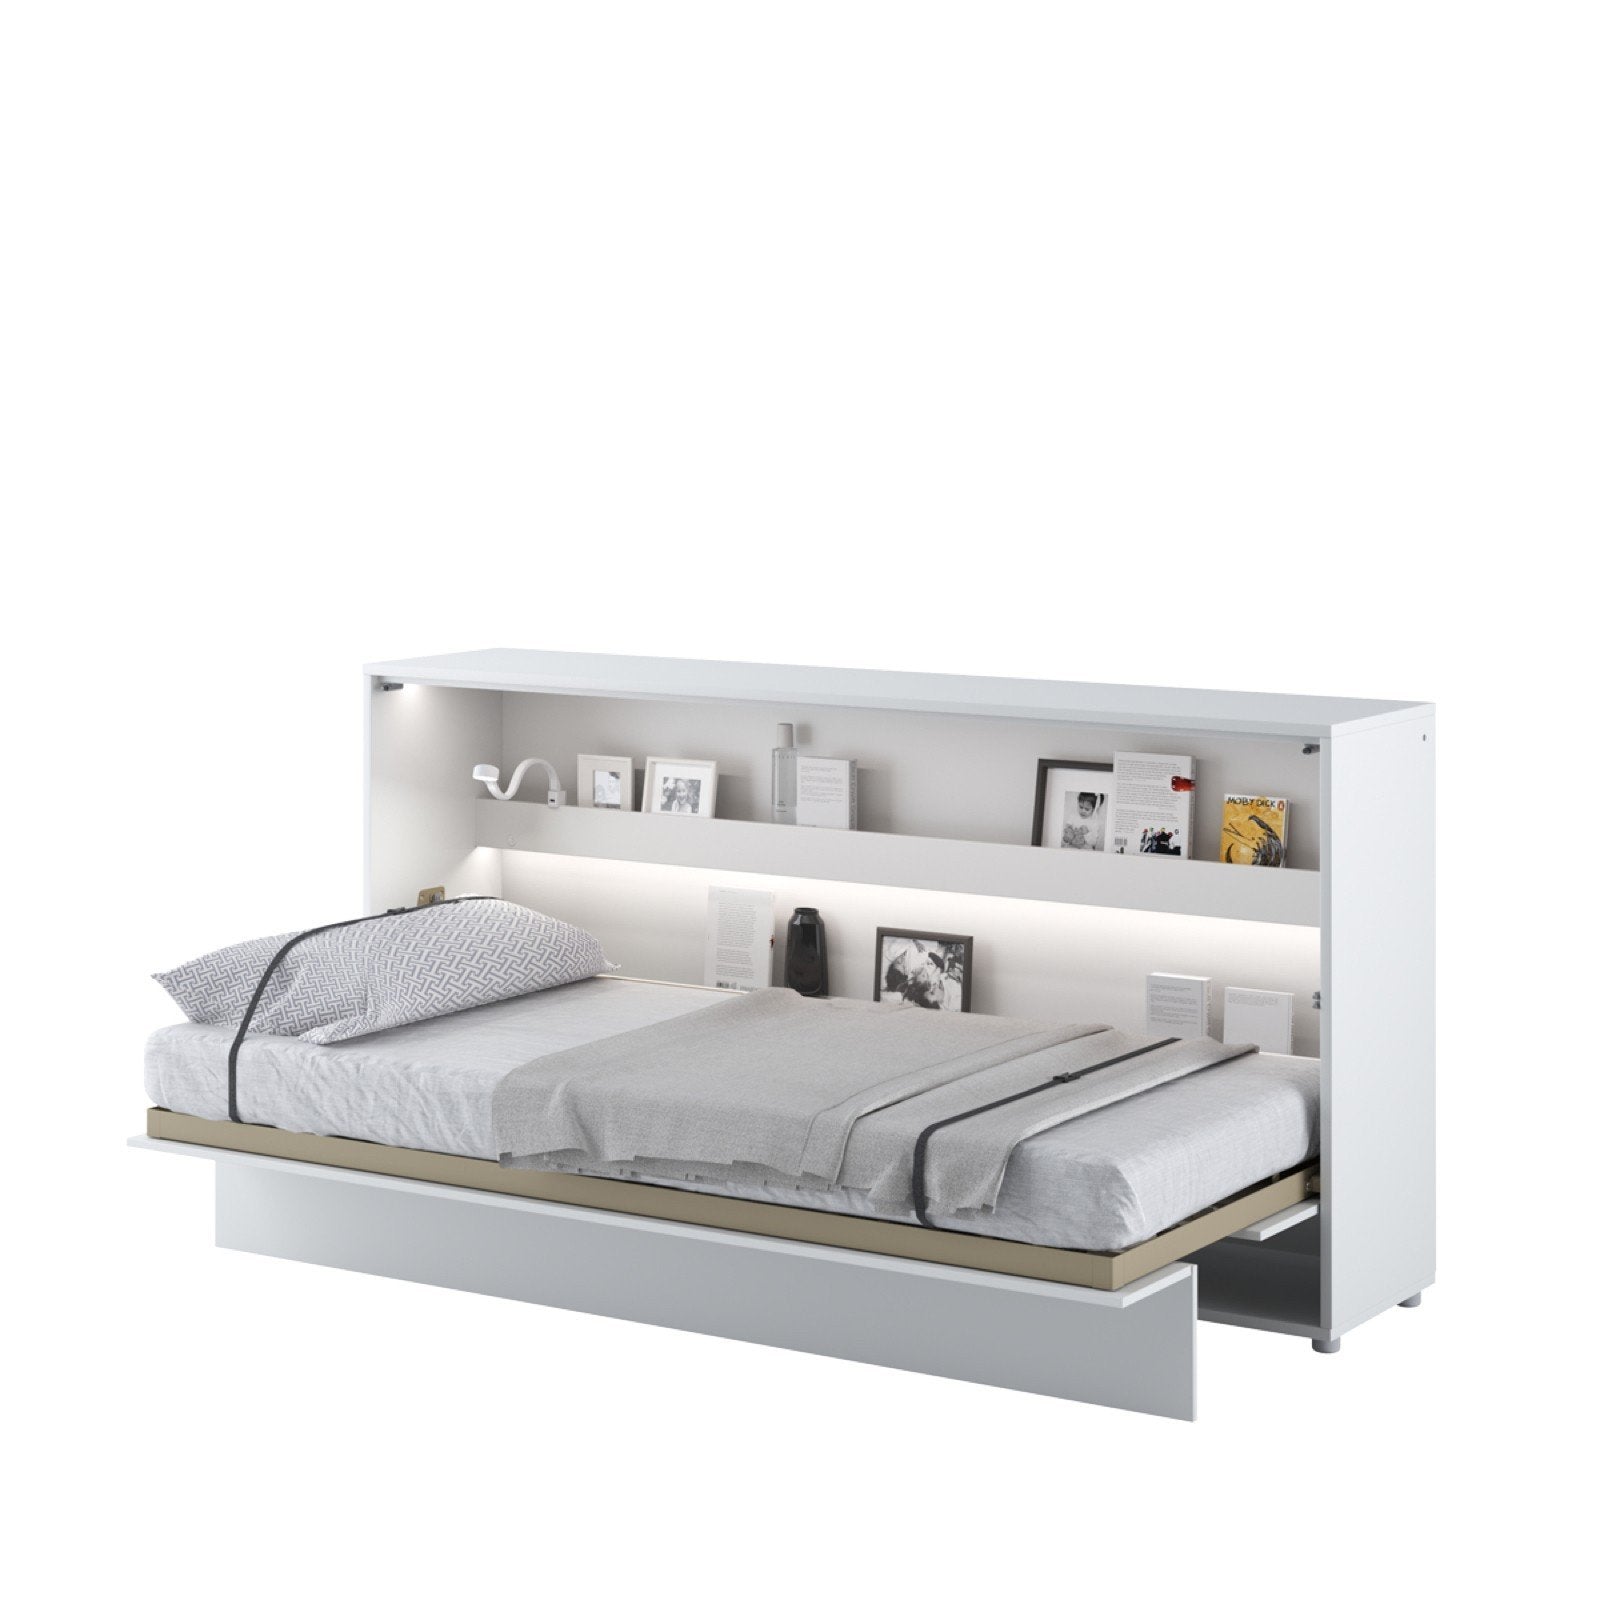 View BC06 Horizontal Wall Bed Concept 90cm Murphy Bed White Gloss 90 x 200cm information